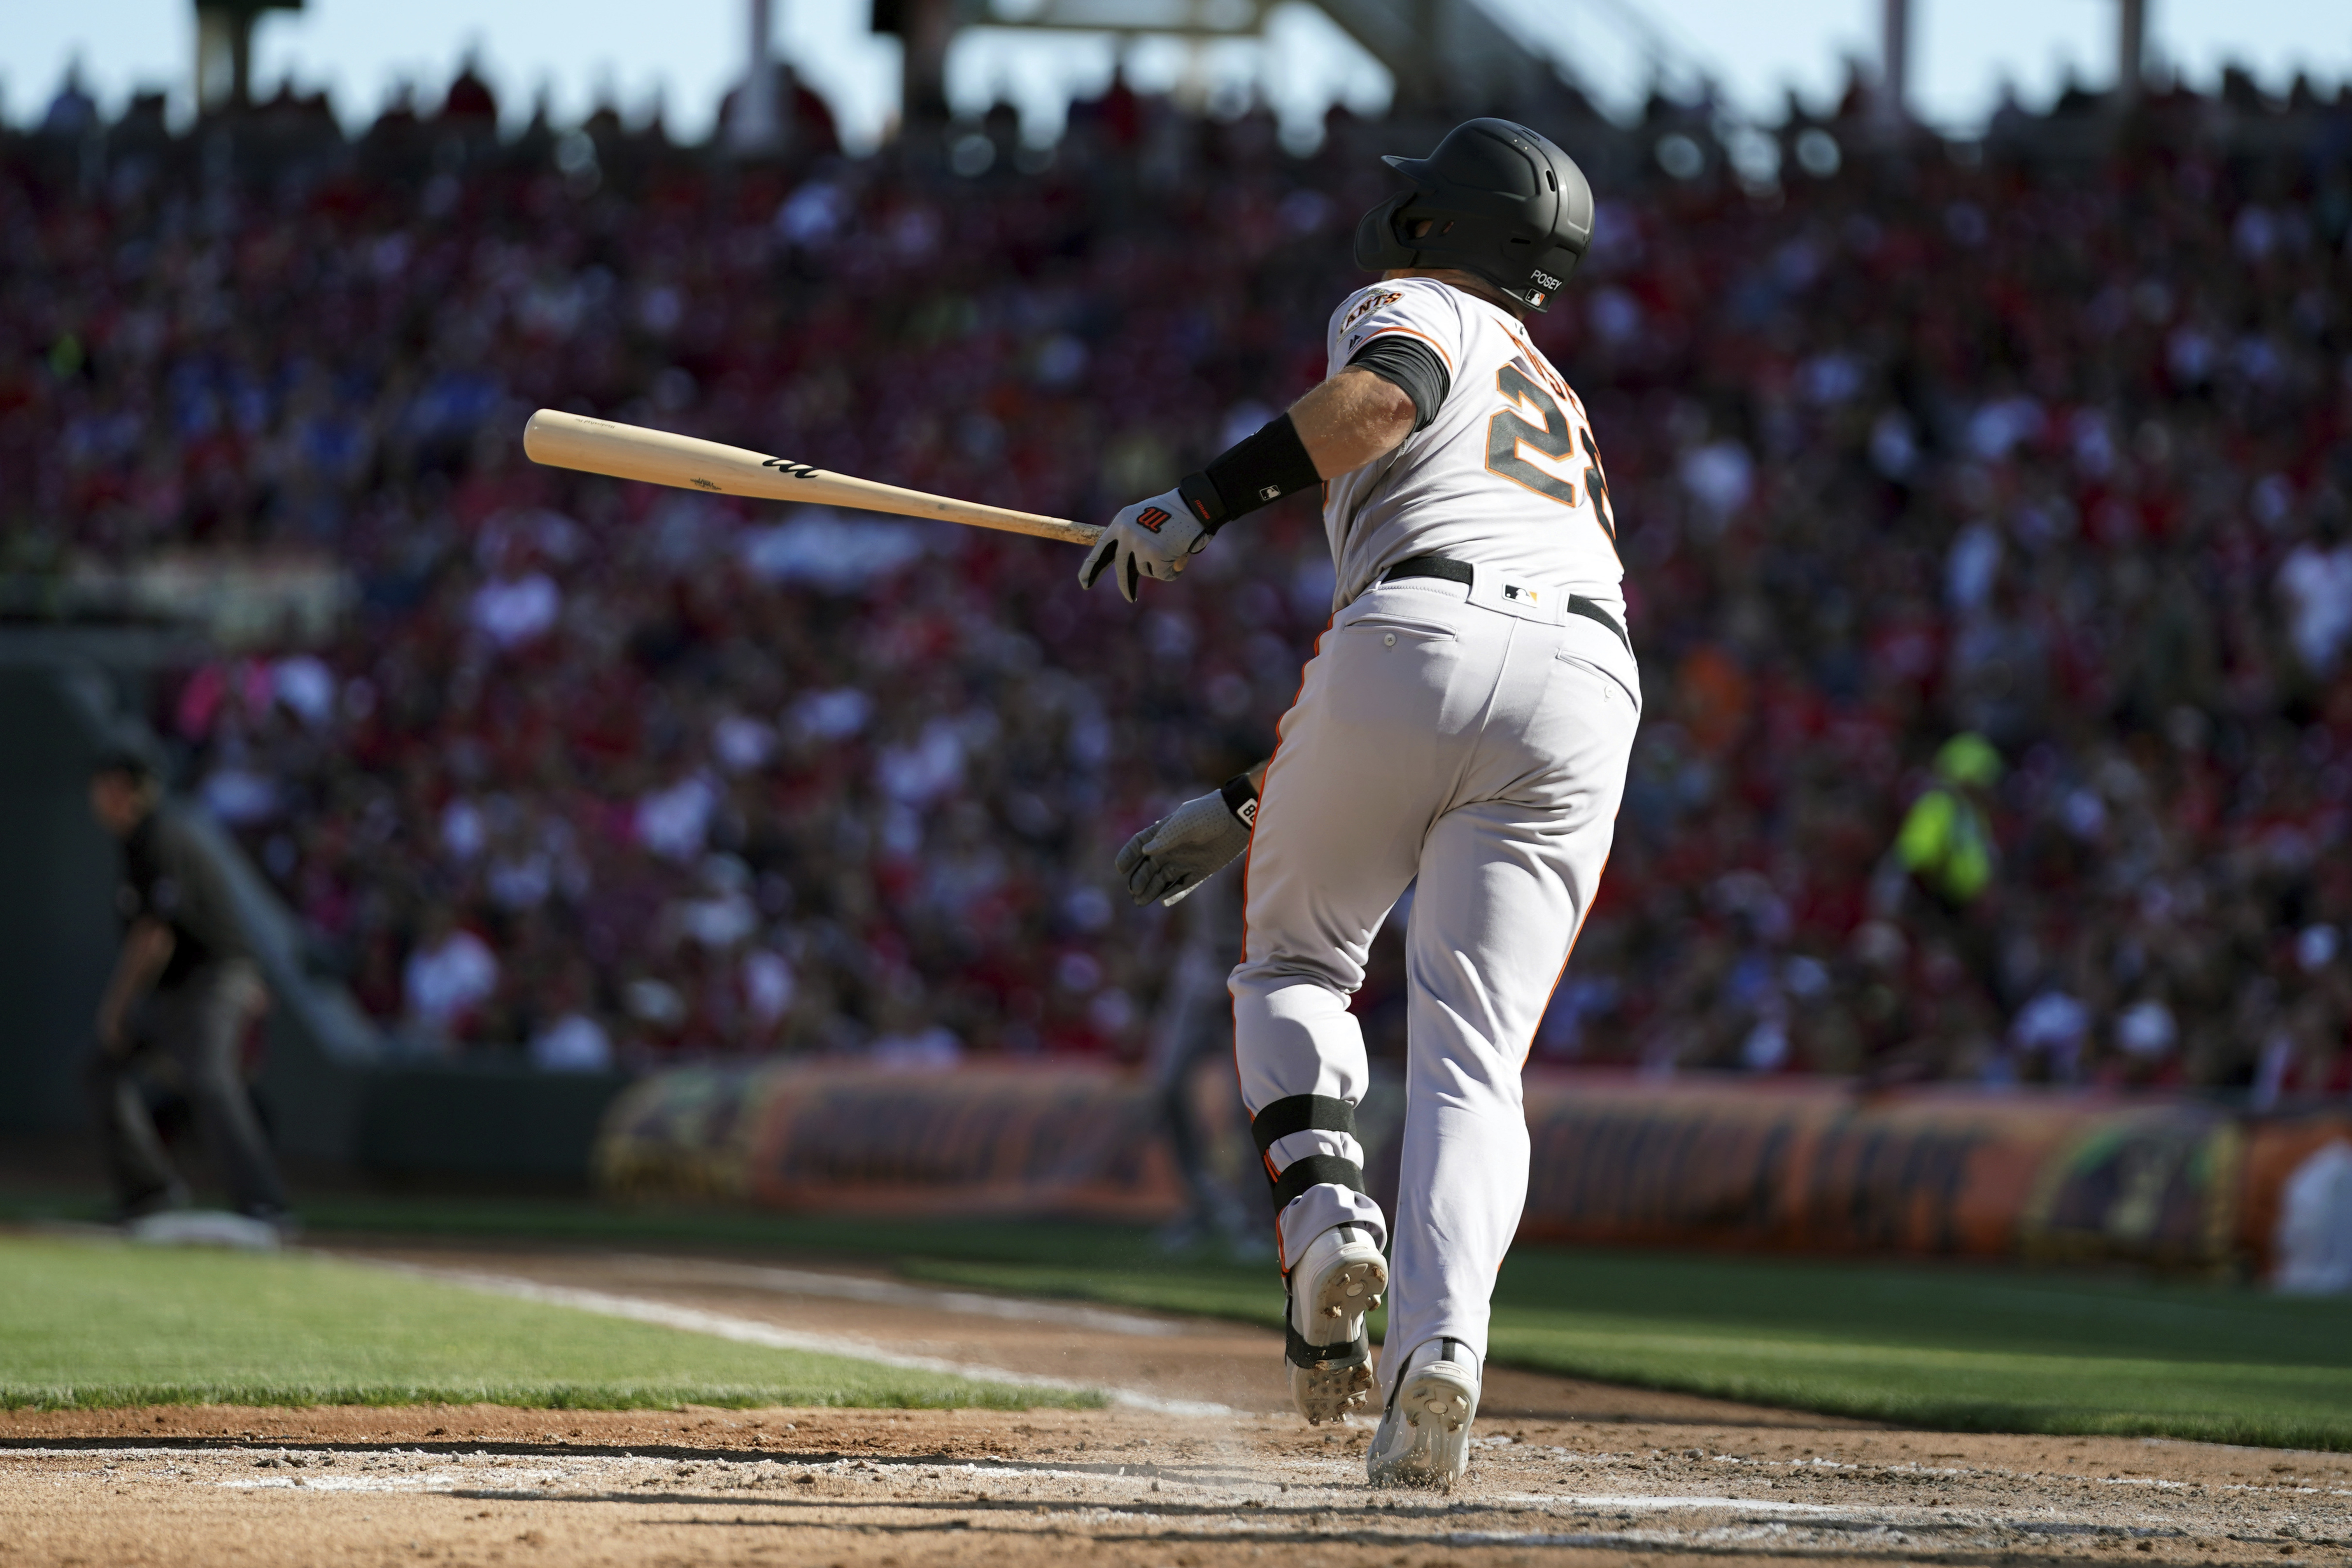 Giants shake off 4-run Reds first, pull out 6-5 win